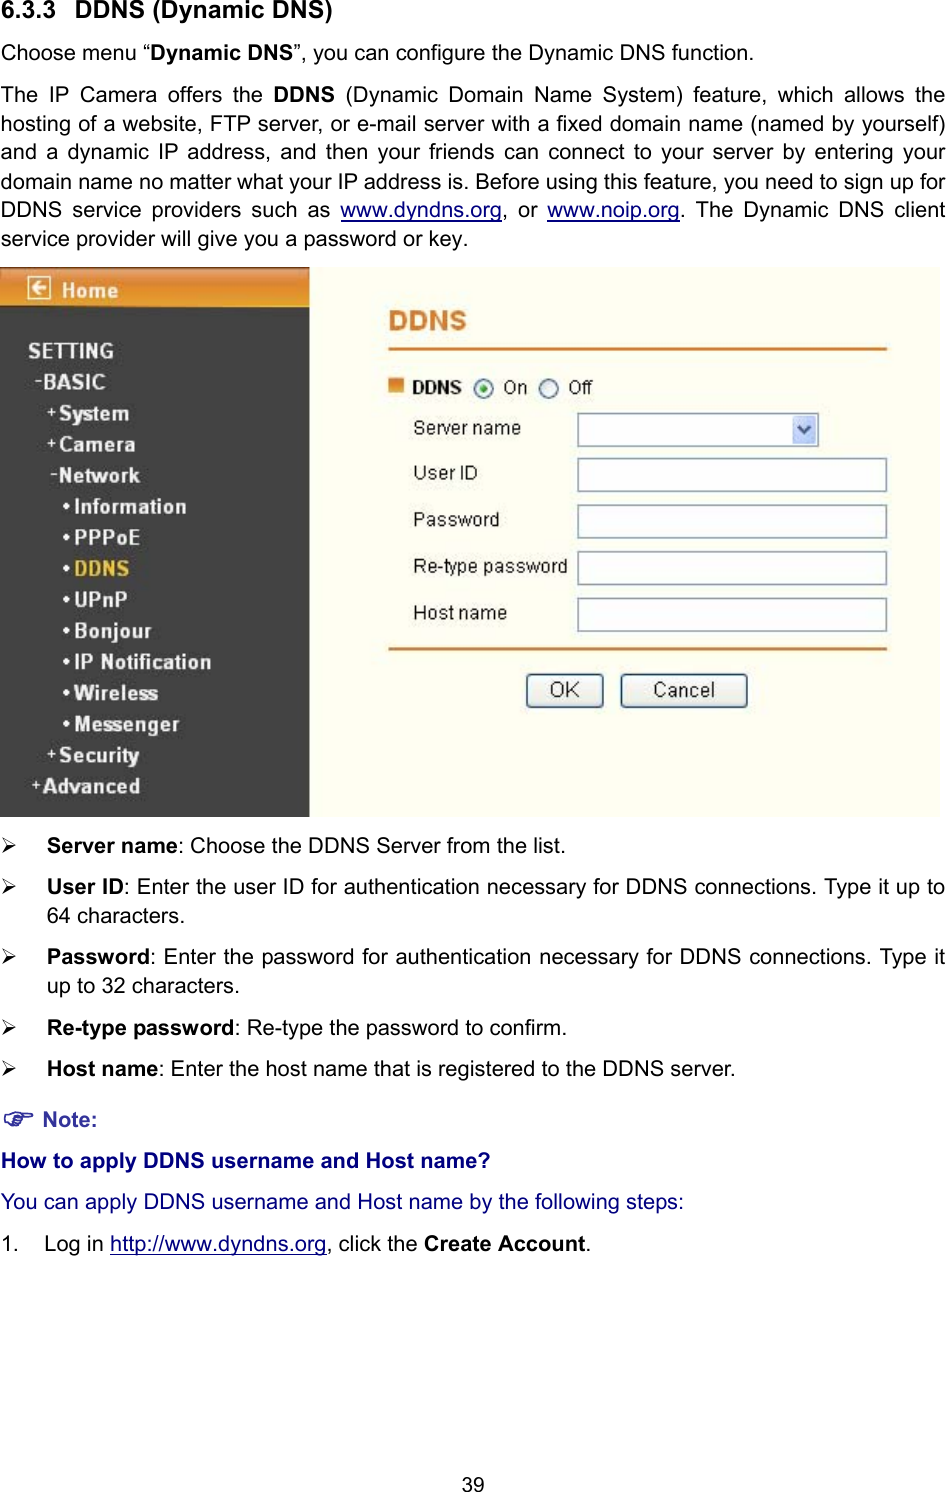 39 6.3.3  DDNS (Dynamic DNS) Choose menu “Dynamic DNS”, you can configure the Dynamic DNS function.   The IP Camera offers the DDNS (Dynamic Domain Name System) feature, which allows the hosting of a website, FTP server, or e-mail server with a fixed domain name (named by yourself) and a dynamic IP address, and then your friends can connect to your server by entering your domain name no matter what your IP address is. Before using this feature, you need to sign up for DDNS service providers such as www.dyndns.org, or www.noip.org. The Dynamic DNS client service provider will give you a password or key.  ¾ Server name: Choose the DDNS Server from the list. ¾ User ID: Enter the user ID for authentication necessary for DDNS connections. Type it up to 64 characters. ¾ Password: Enter the password for authentication necessary for DDNS connections. Type it up to 32 characters. ¾ Re-type password: Re-type the password to confirm. ¾ Host name: Enter the host name that is registered to the DDNS server. ) Note: How to apply DDNS username and Host name?   You can apply DDNS username and Host name by the following steps: 1. Log in http://www.dyndns.org, click the Create Account. 